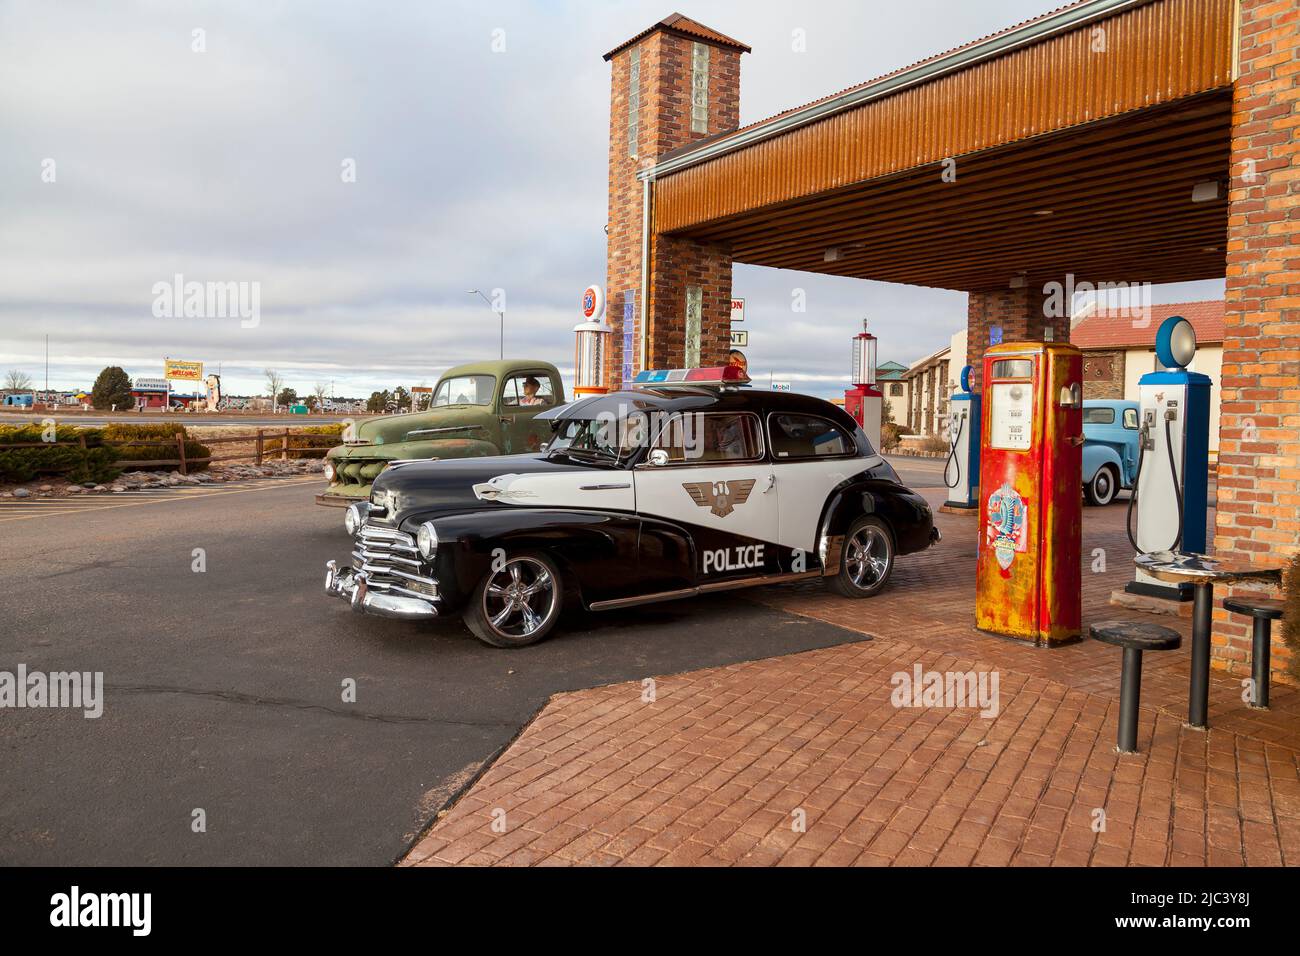 1948 classic Chevrolet police car displayed at a historic gas station in Valle, Arizona. USA Stock Photo